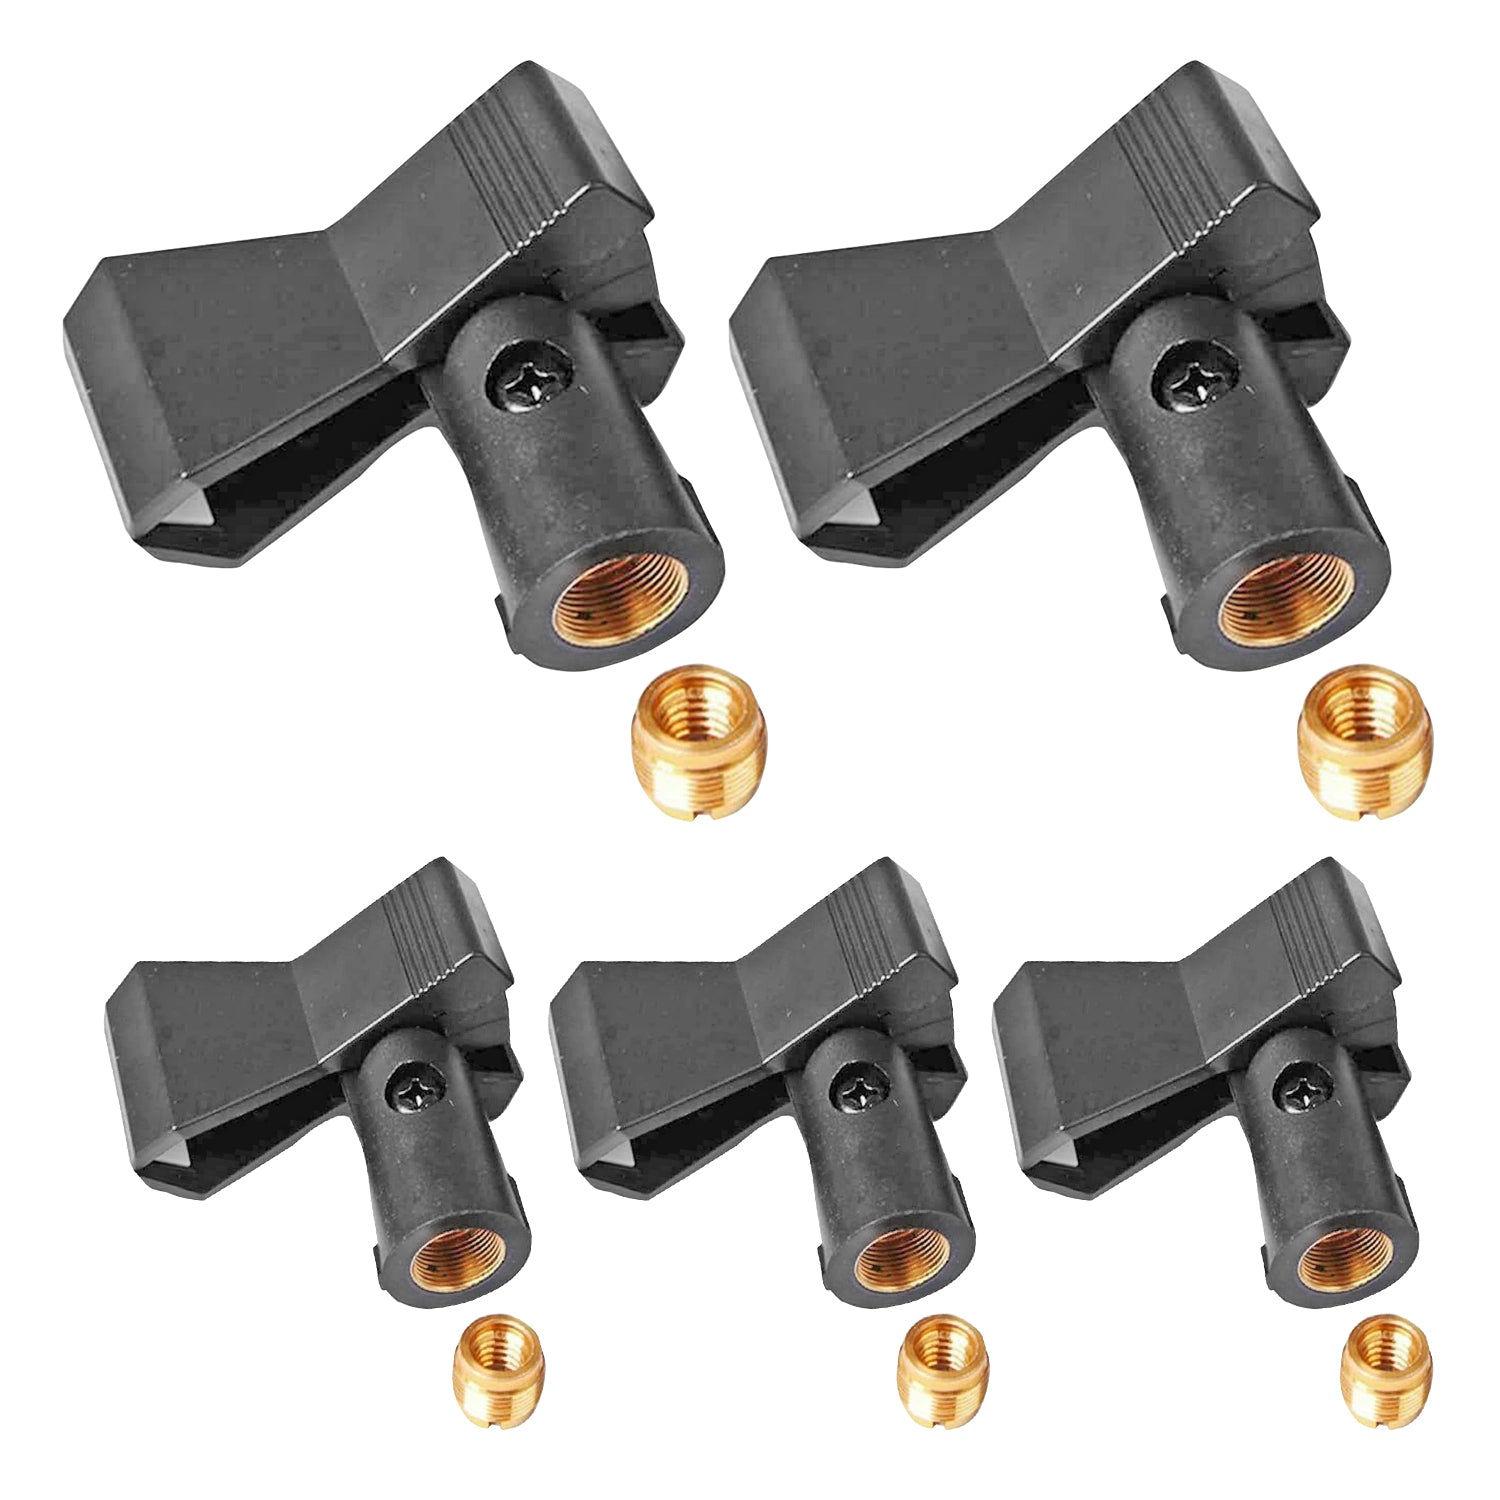 5 Core Universal Microphone Clip Holder 5Pack Mic Mount w Gold Plated 5/8" - 3/8" Screw Adapter